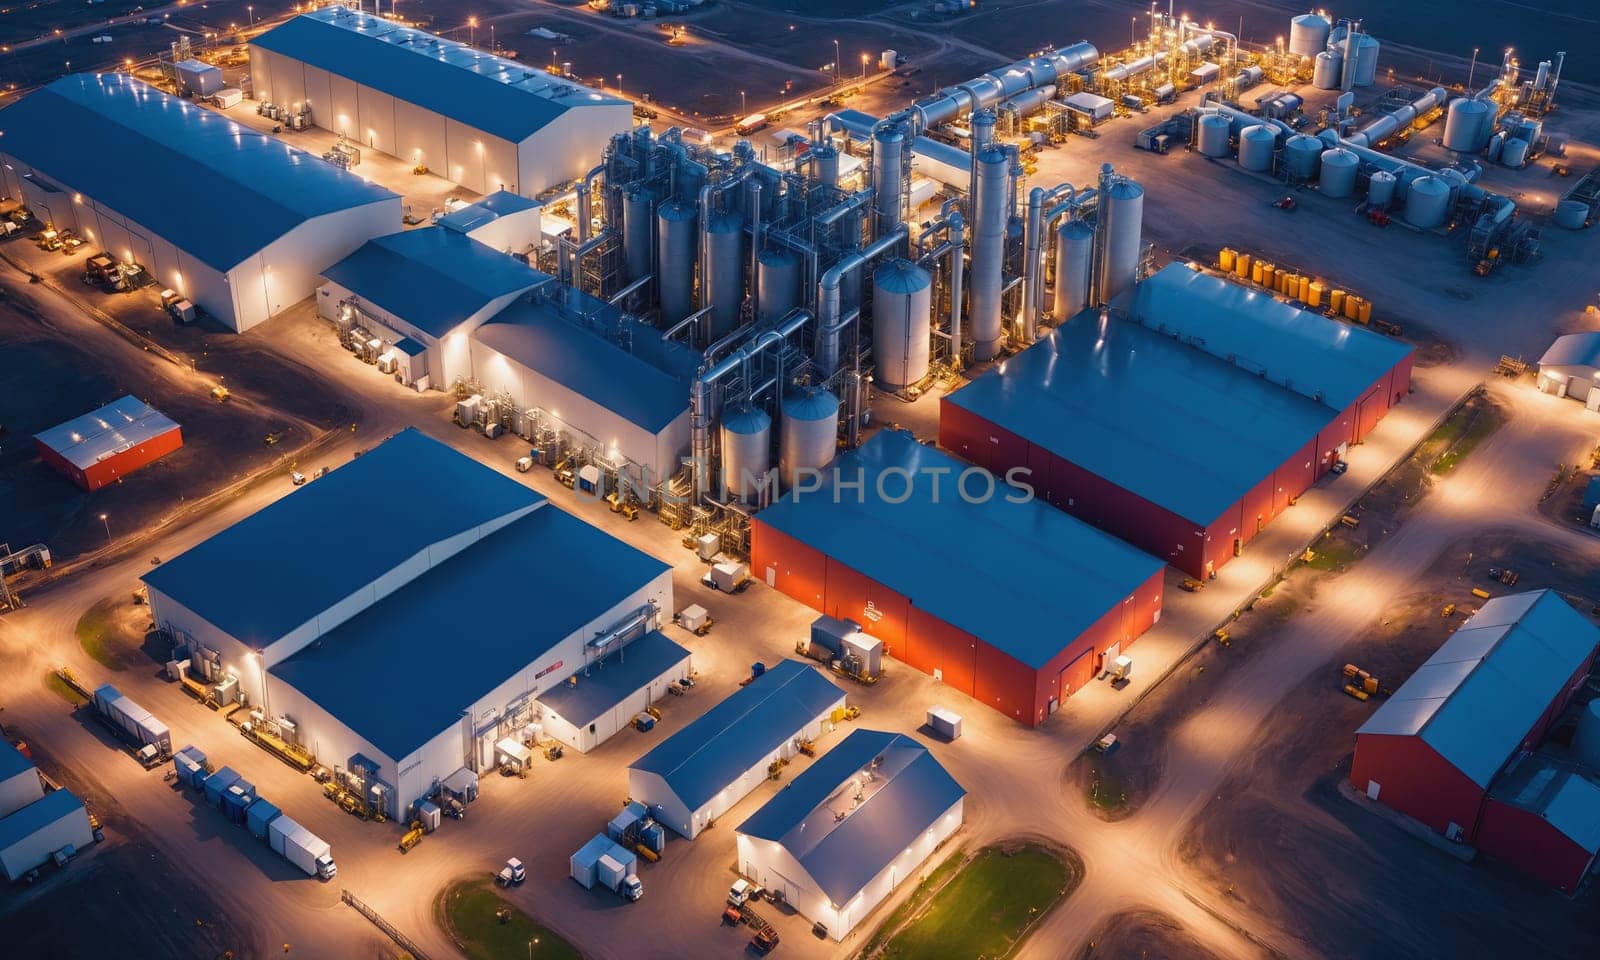 An illuminated industrial complex at dusk. View from above by Andre1ns